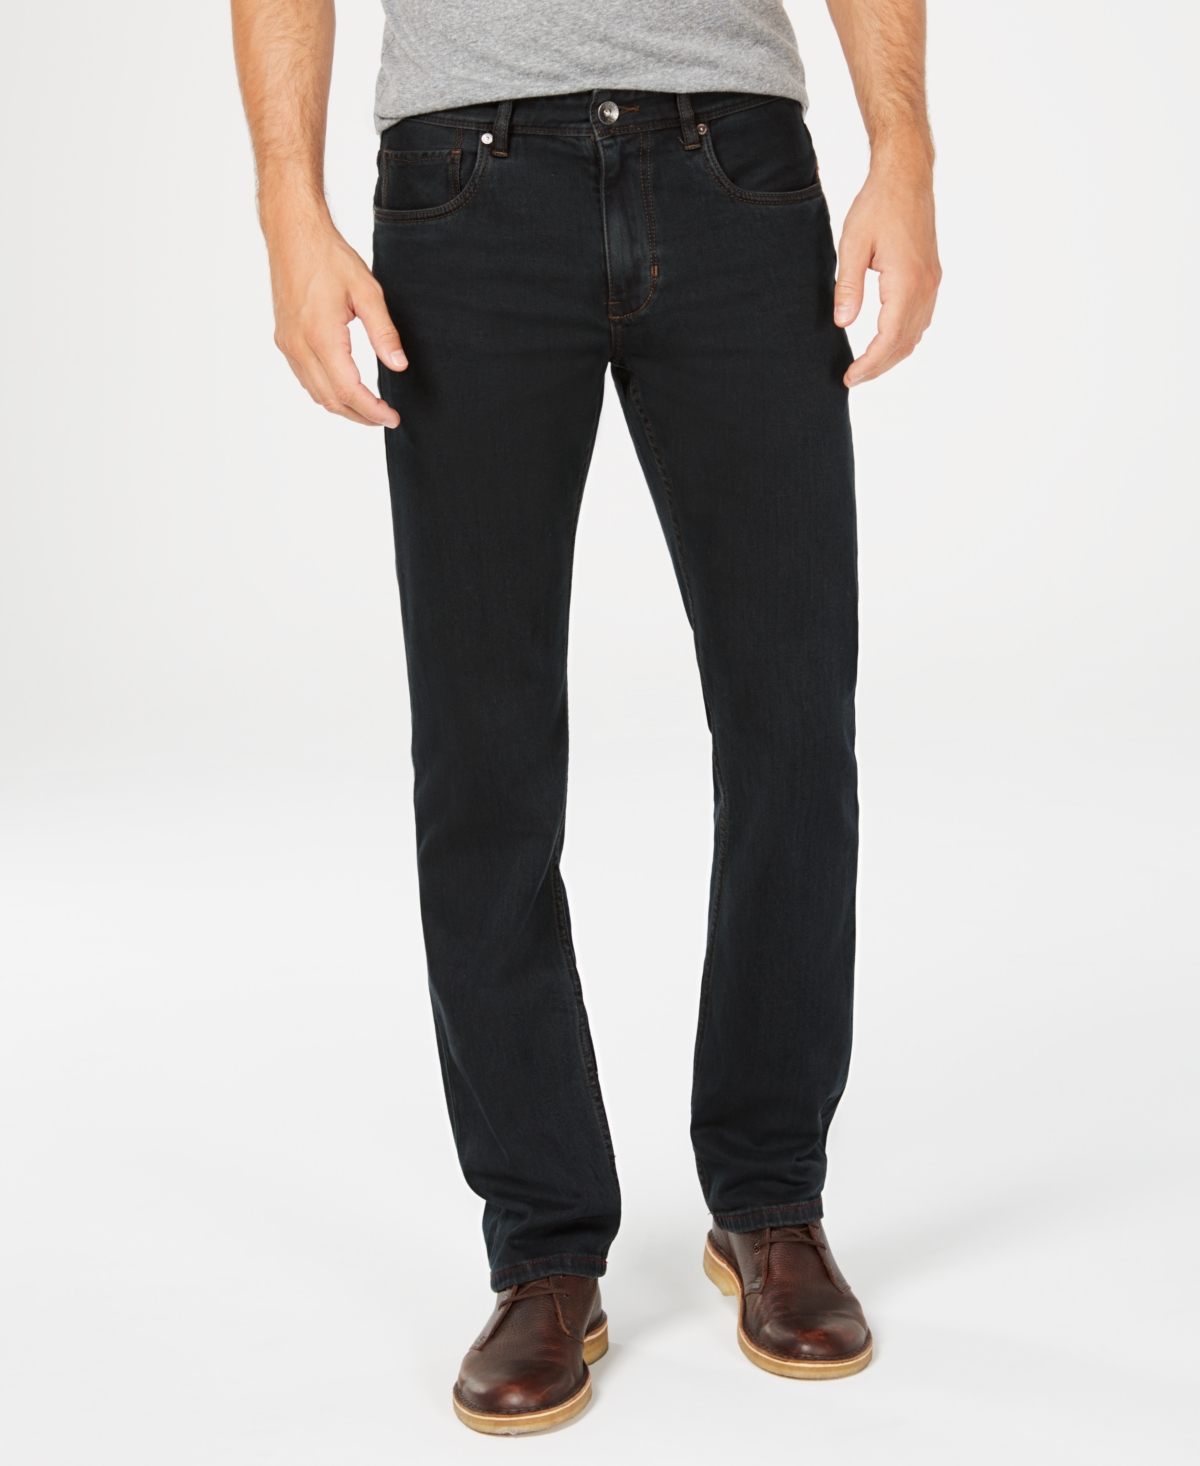 UPC 719260422544 product image for Tommy Bahama Men's Antigua Cove Authentic Fit Jeans | upcitemdb.com